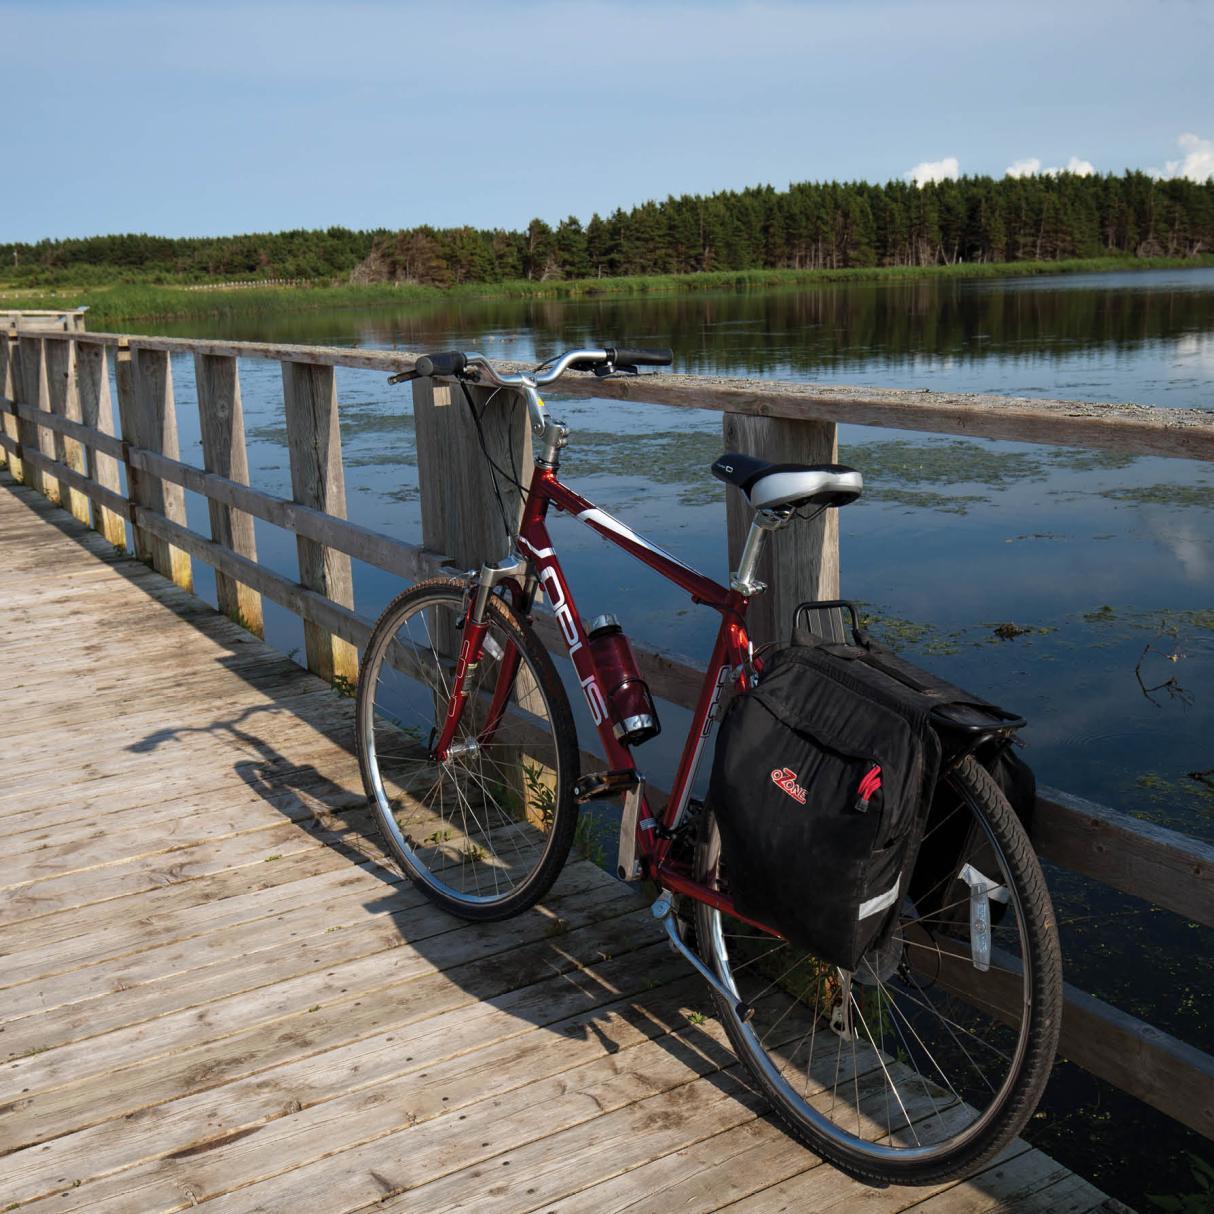 Cycling a series of pretty trail bridges to St. Peter's Bay